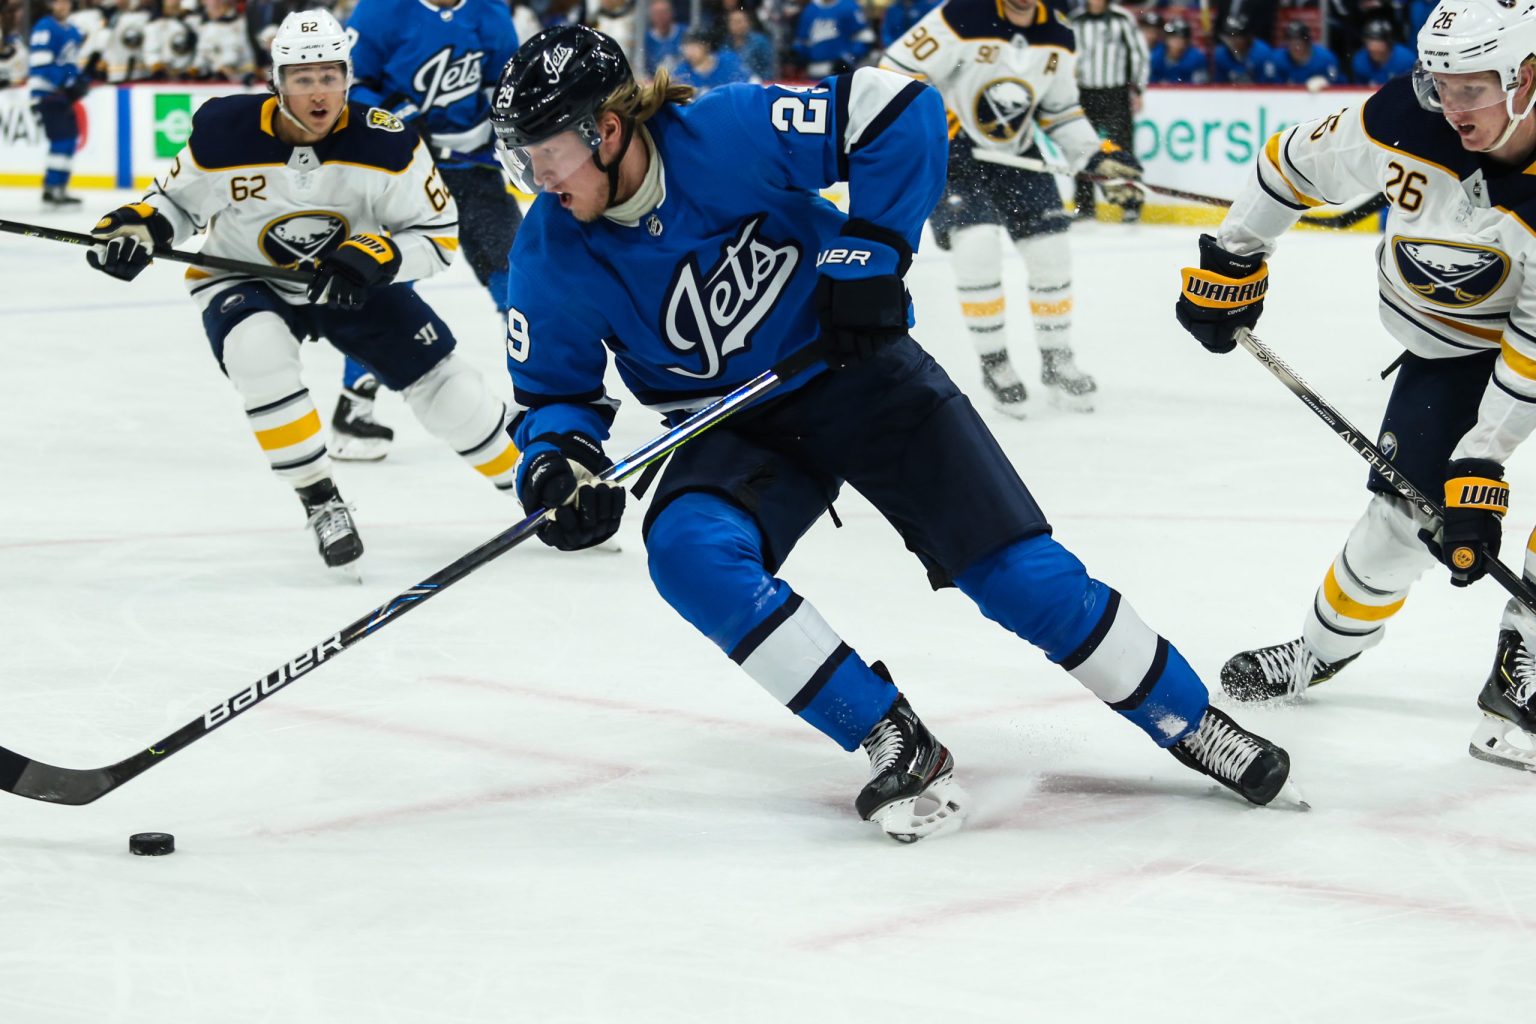 Top 5 plays from 2019-2020: Patrik Laine - HOCKEY SNIPERS